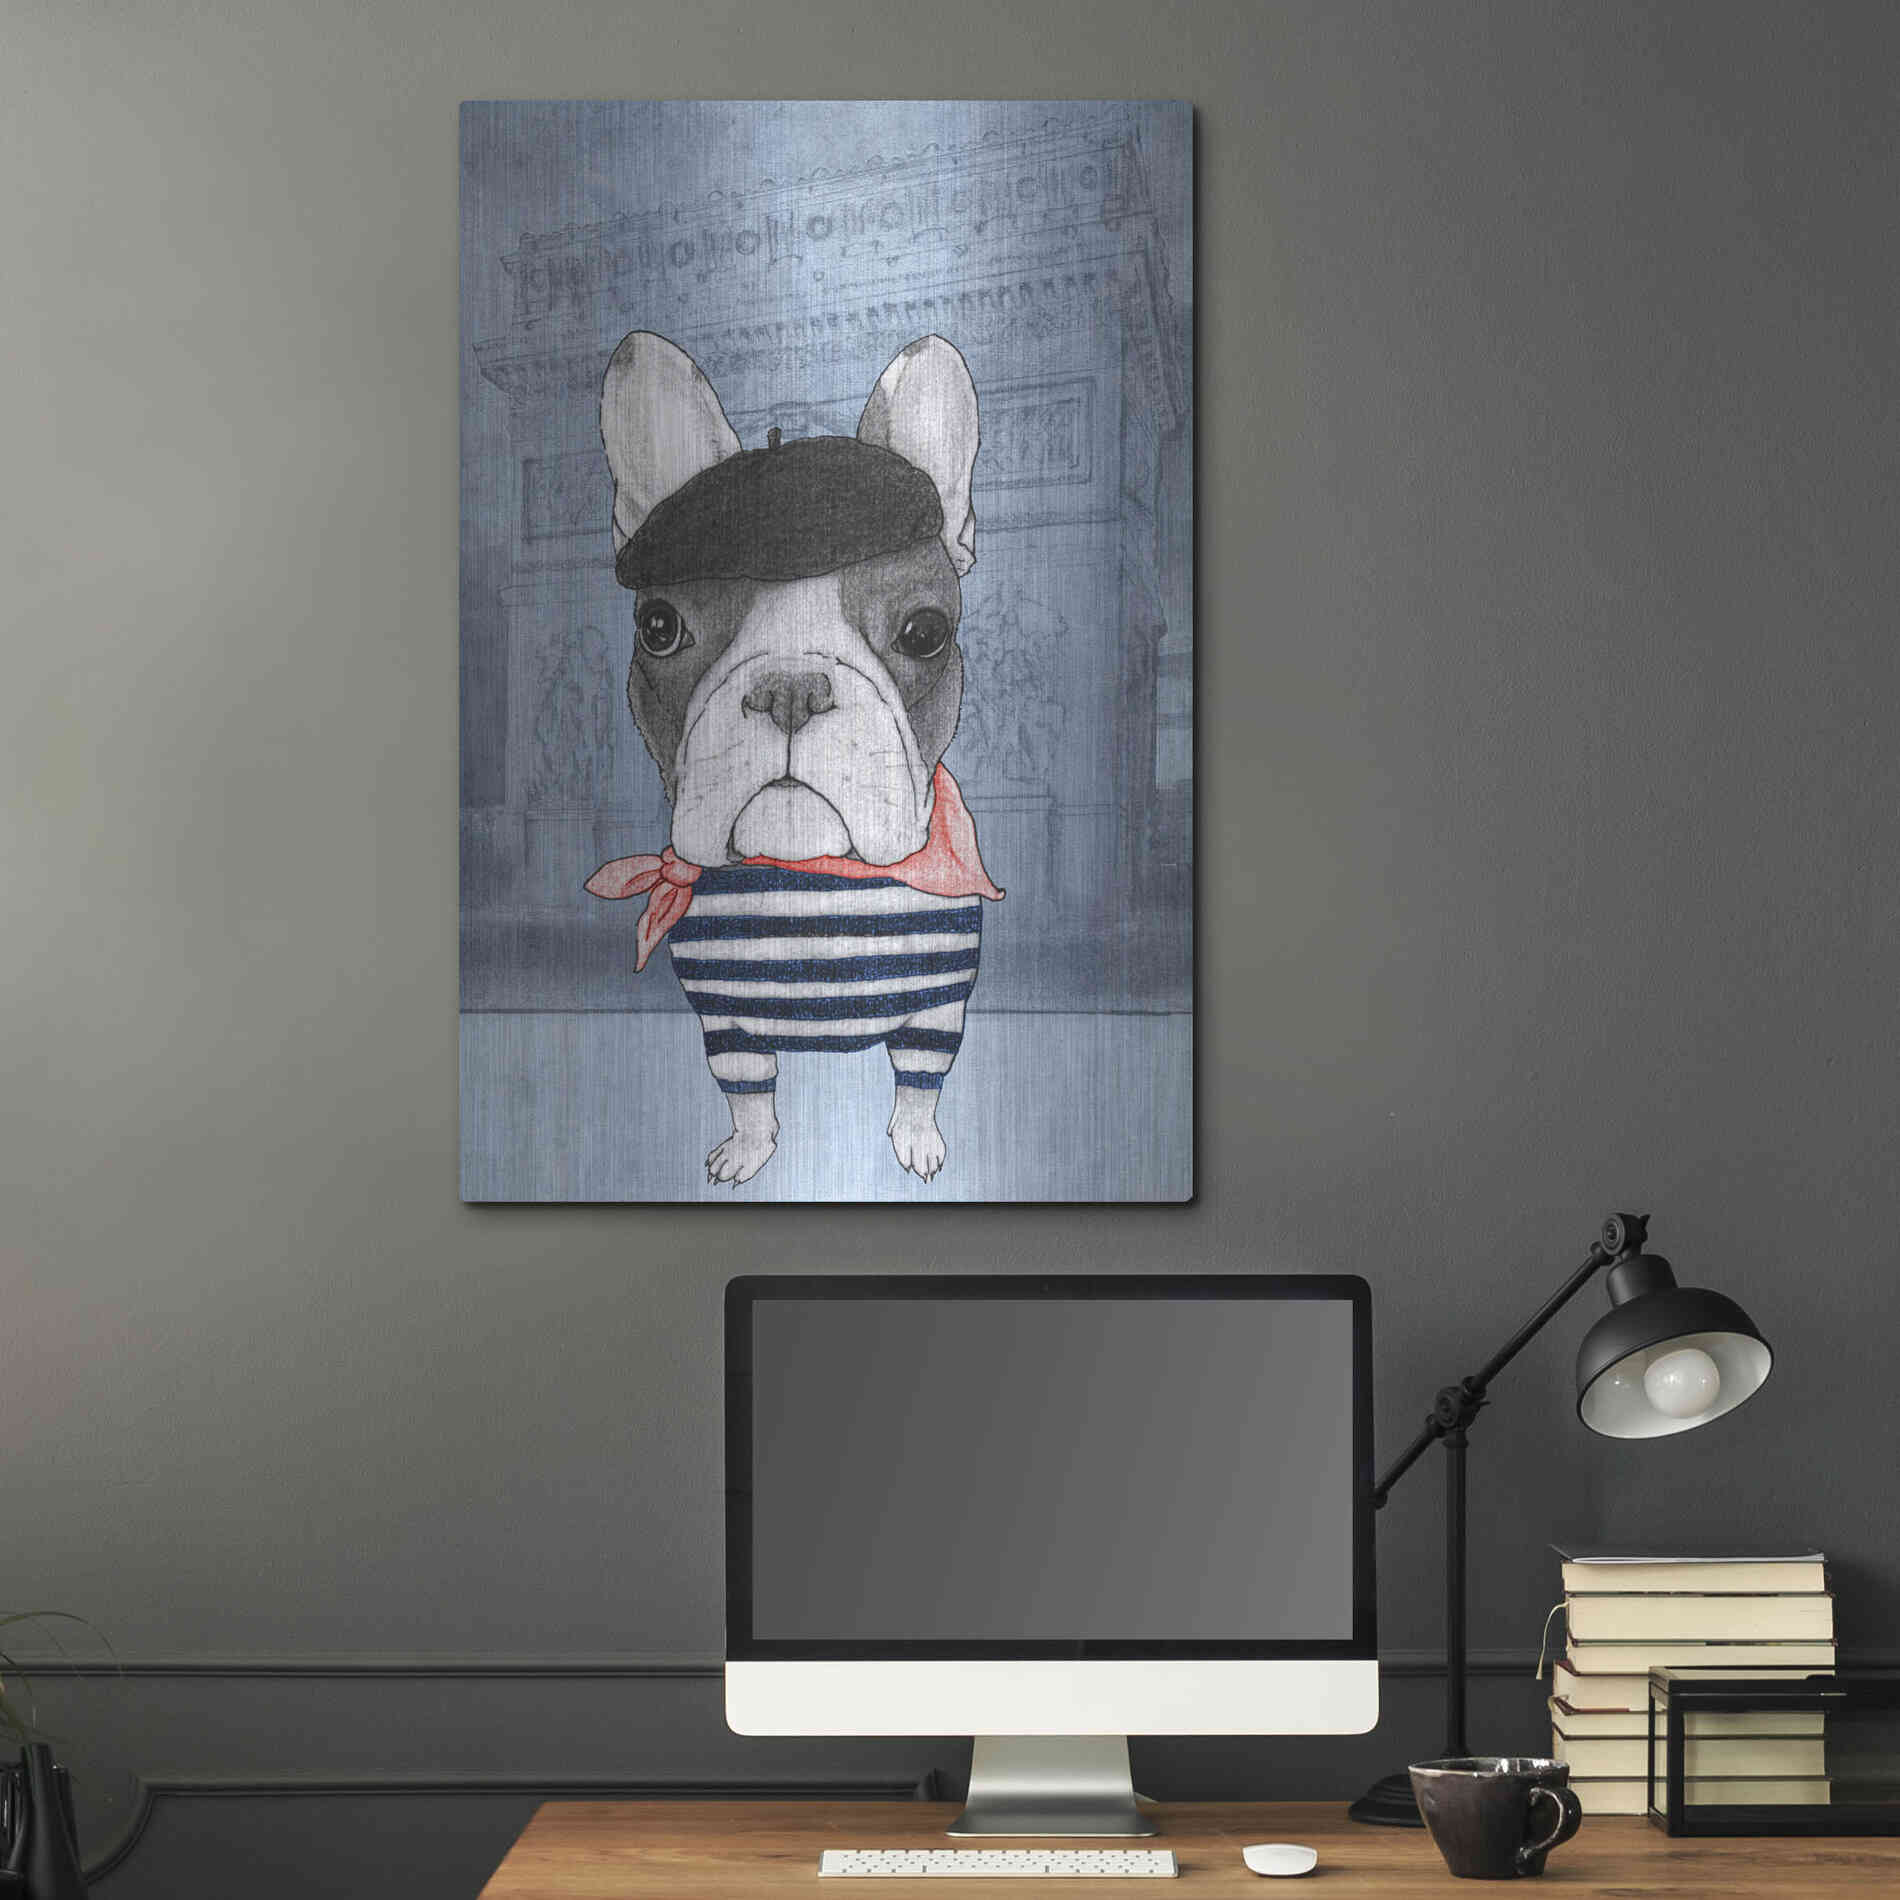 Luxe Metal Art 'French Bulldog with Arc de Triomphe' by Barruf Metal Wall Art,24x36